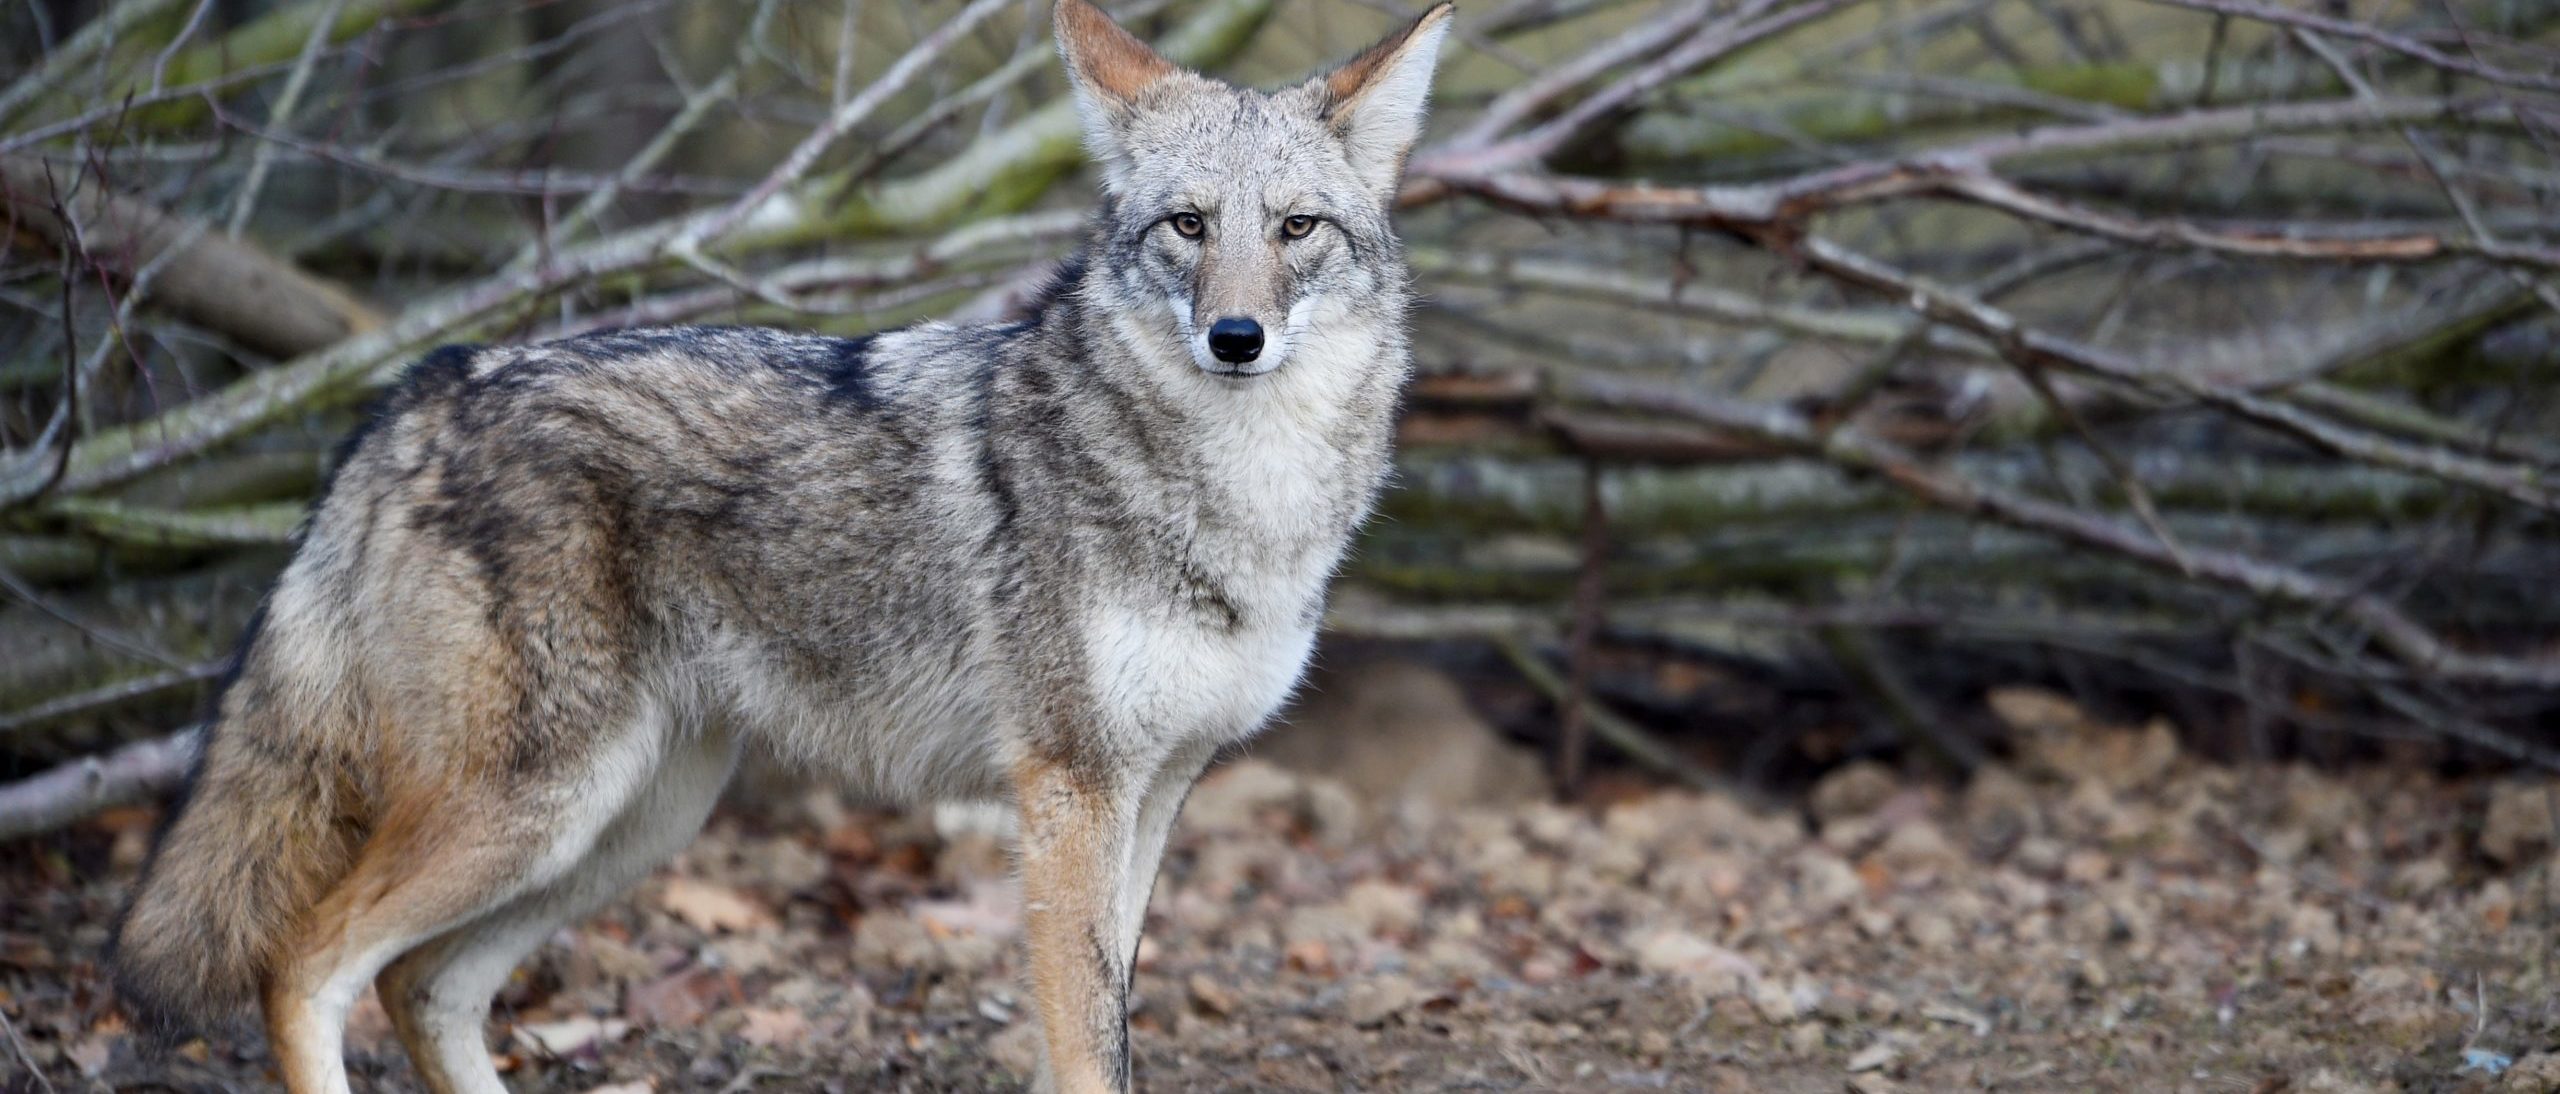 REPORT: Authorities Hunting ‘Aggressive’ Coyote That Has Attacked ...